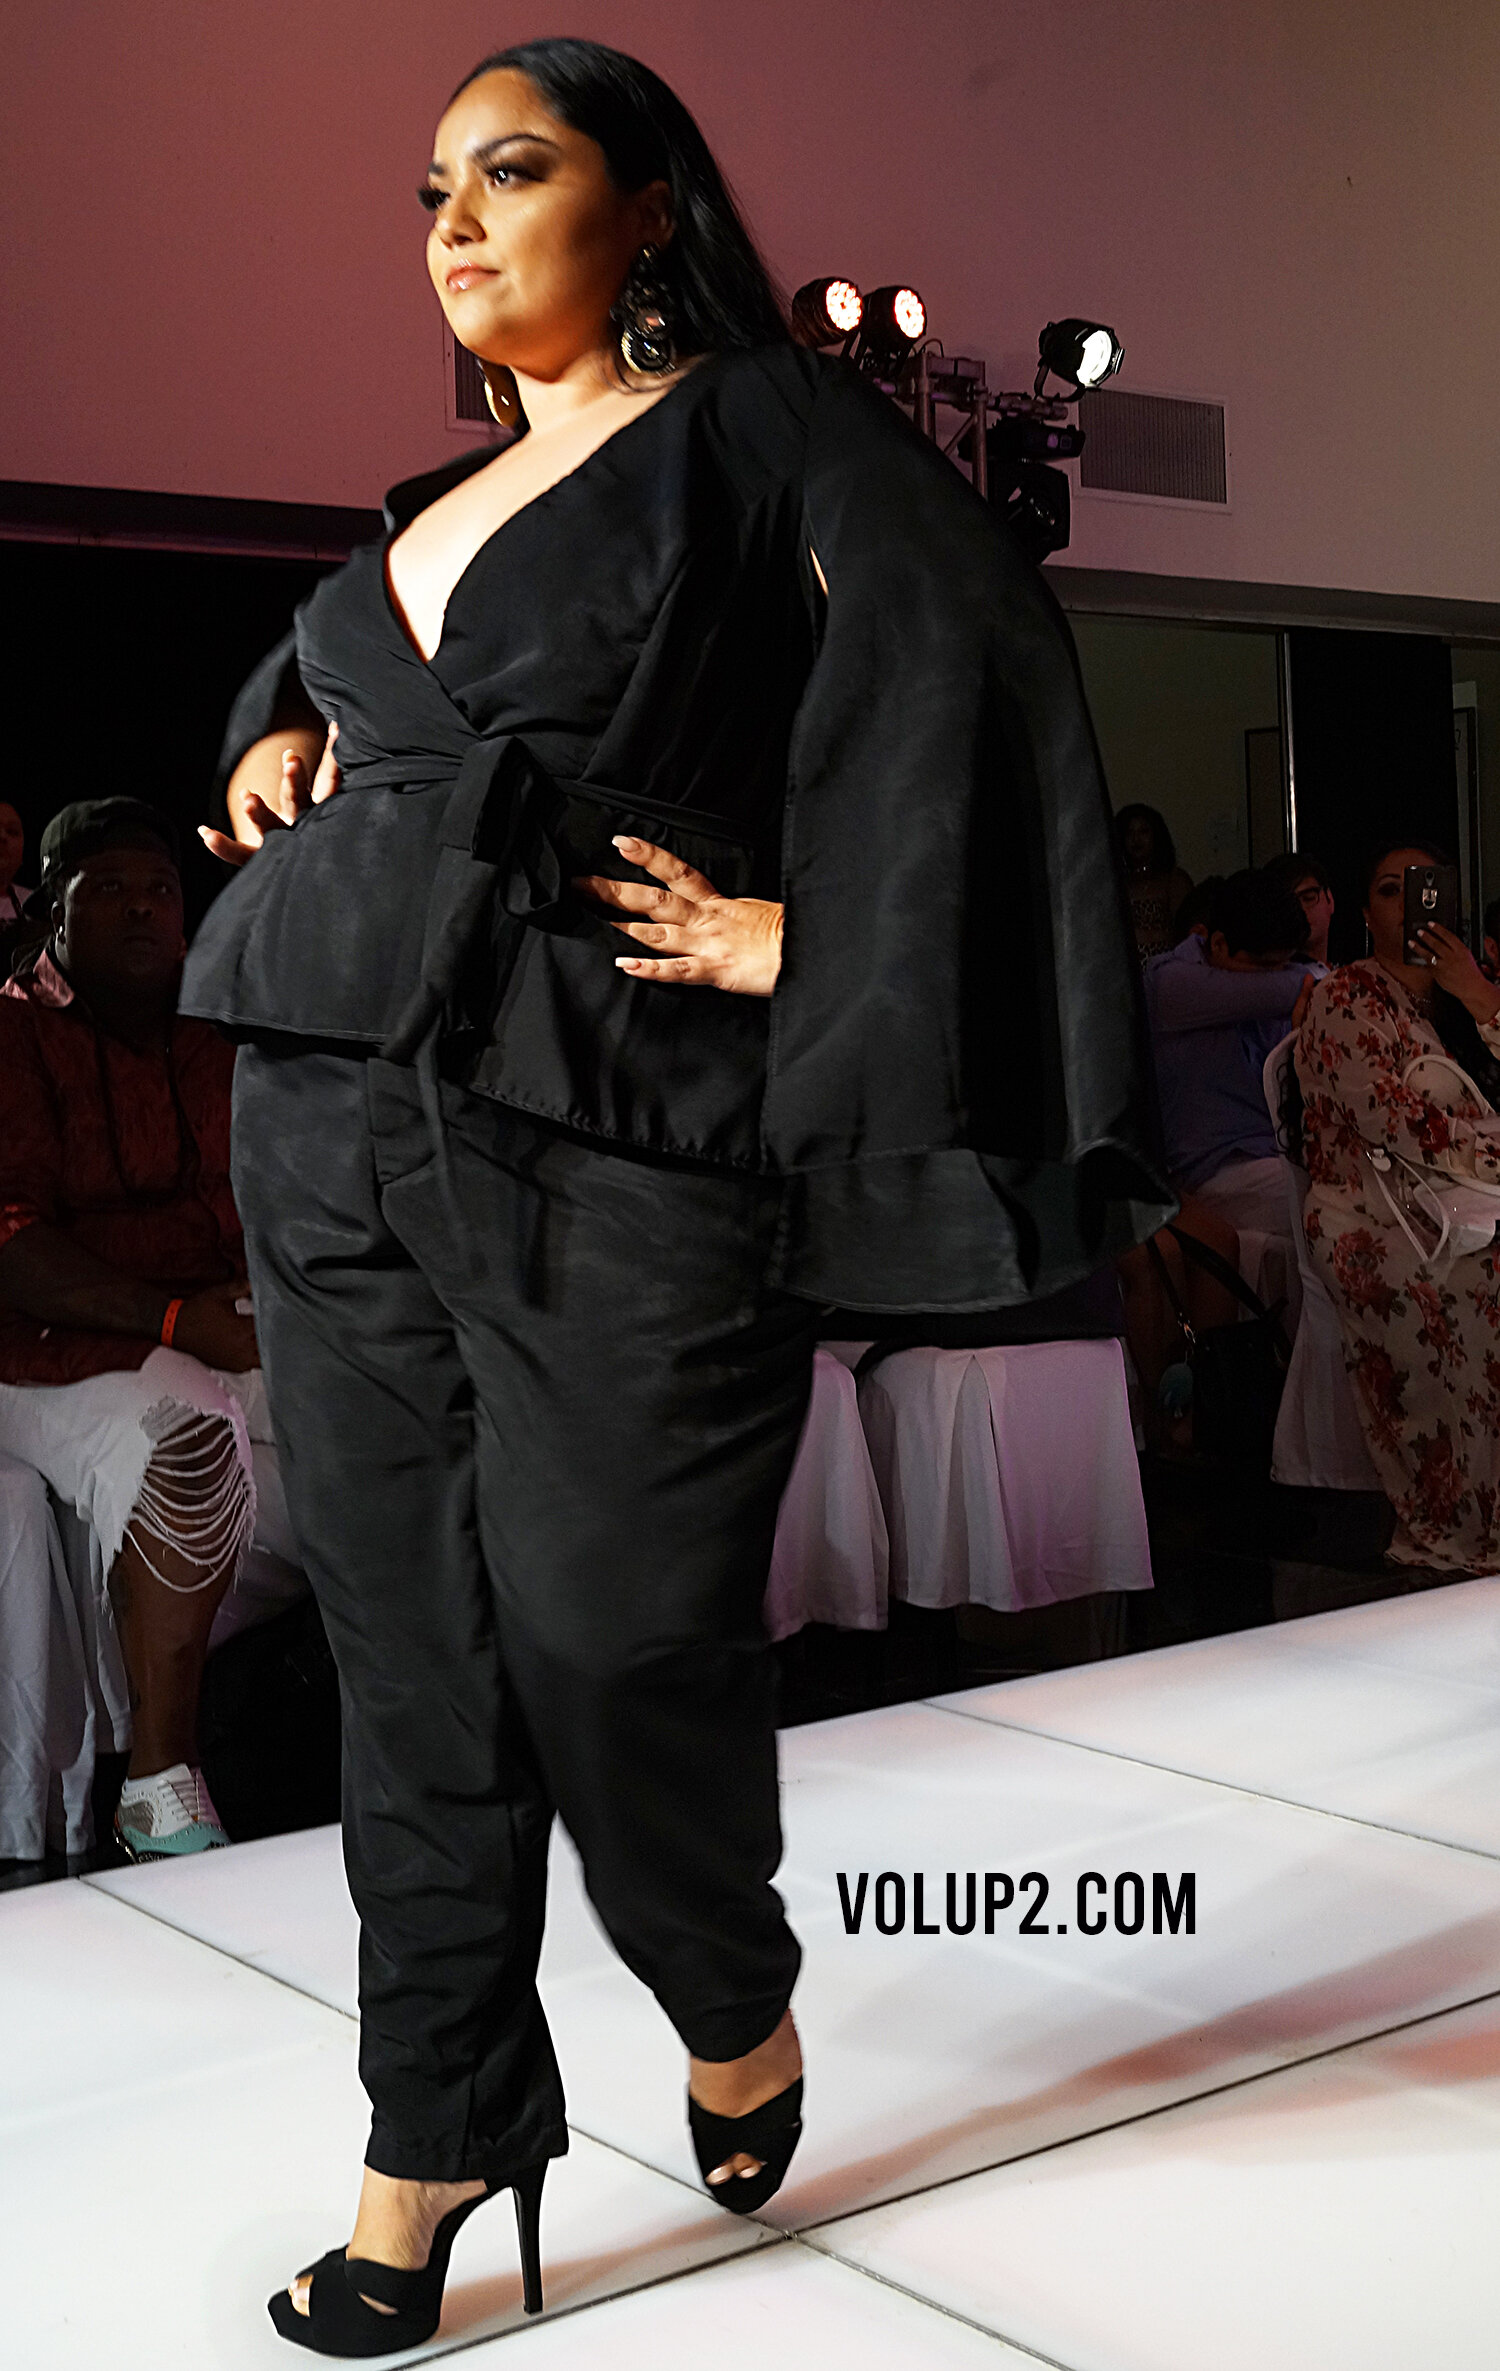 More Runway From The Curvy Fest! Photos by Velvet d'Amour — VOL•UP•2